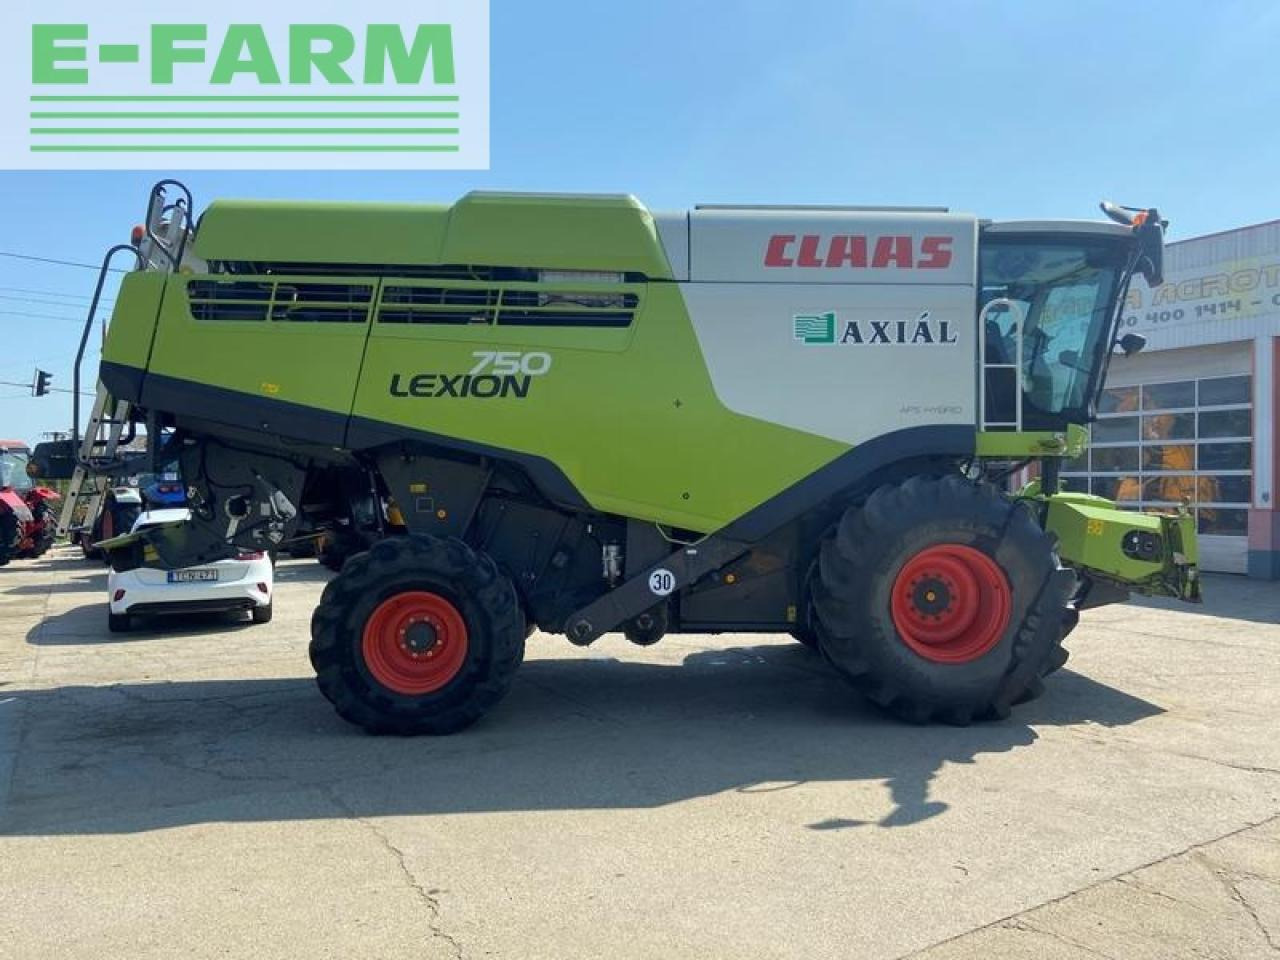 Combine harvester CLAAS lexion 750: picture 4